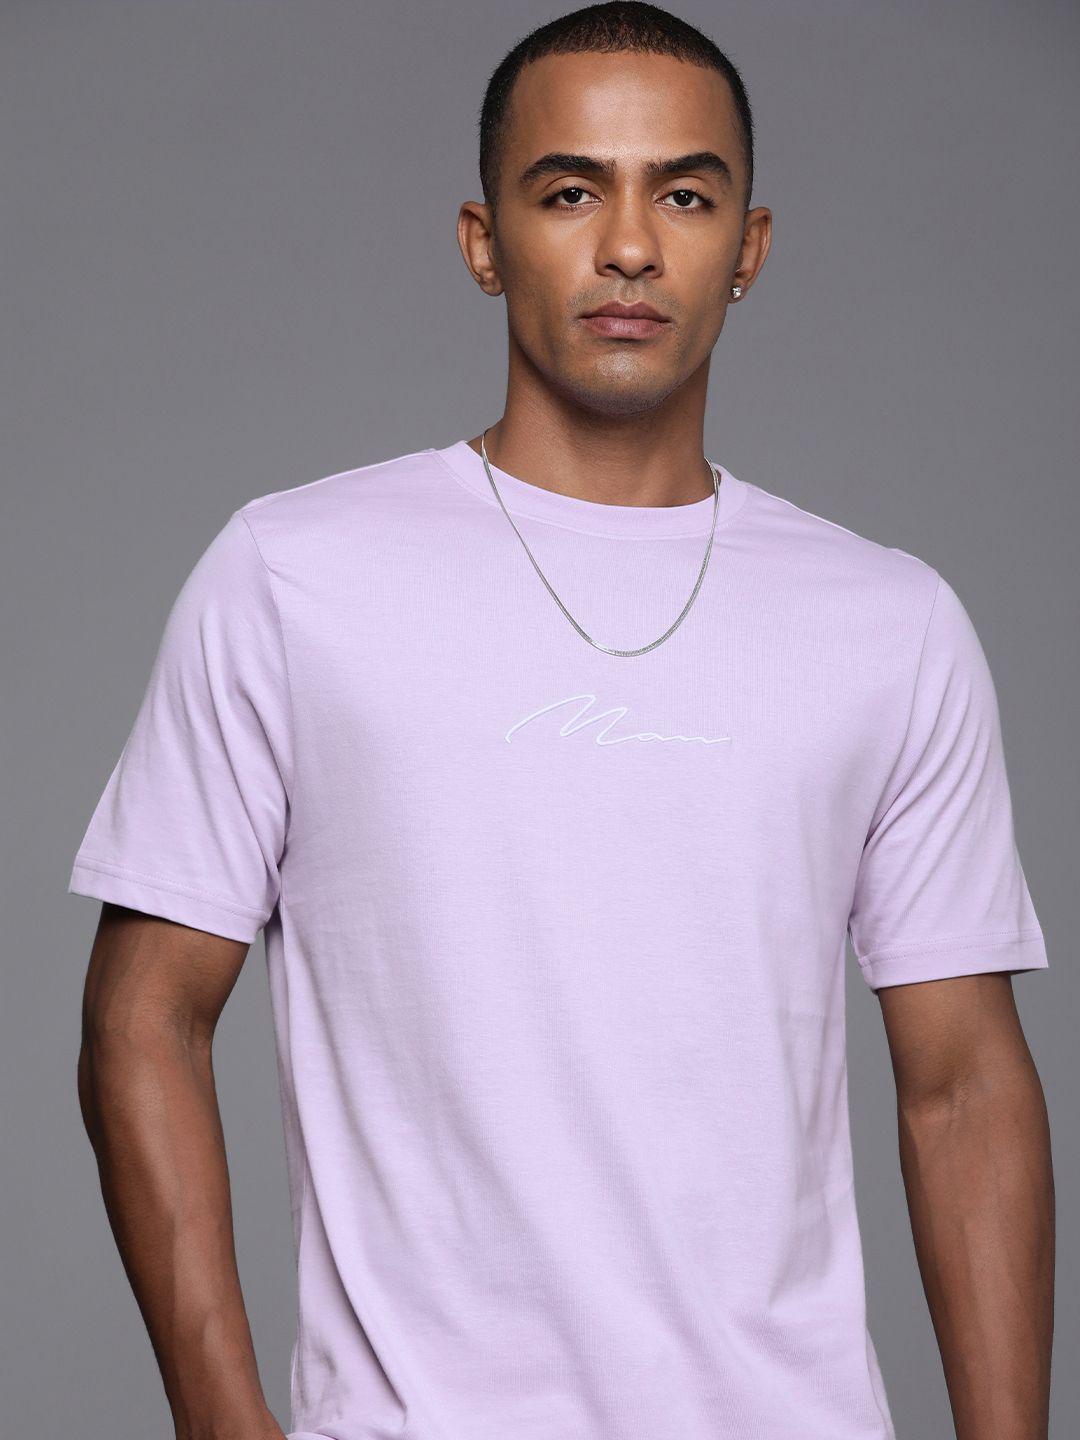 boohooman embroidered pure cotton casual t-shirt